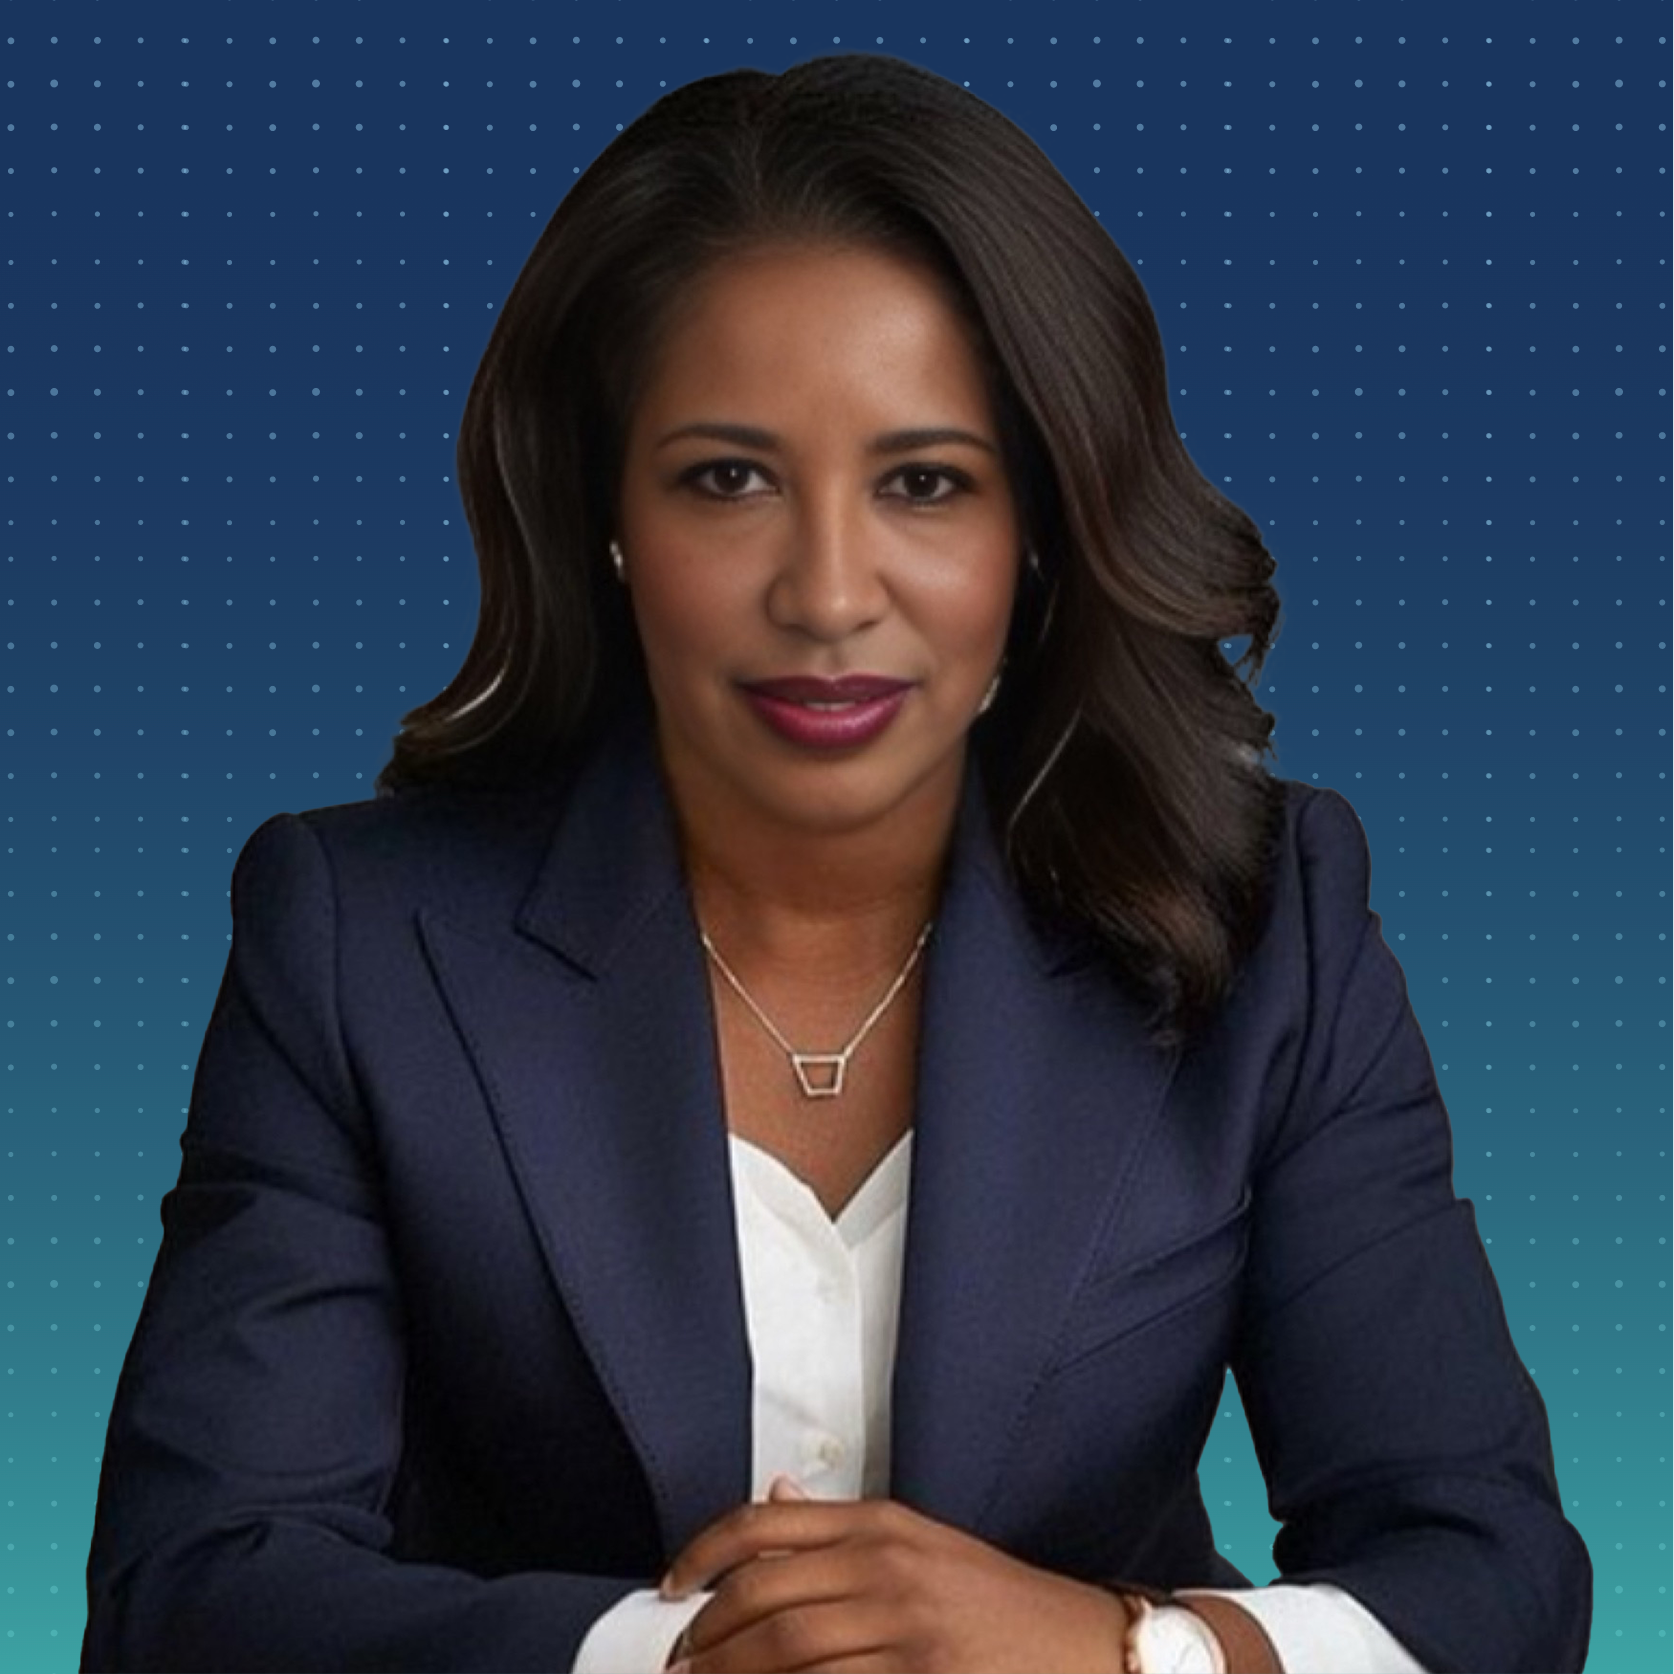 Tresina Lockhart is a young professional Black women. She wears a navy blue business suit with peaked lapels and a crisp white blouse with. Her hands are clasped in front of her. Her hair is shoulder length.